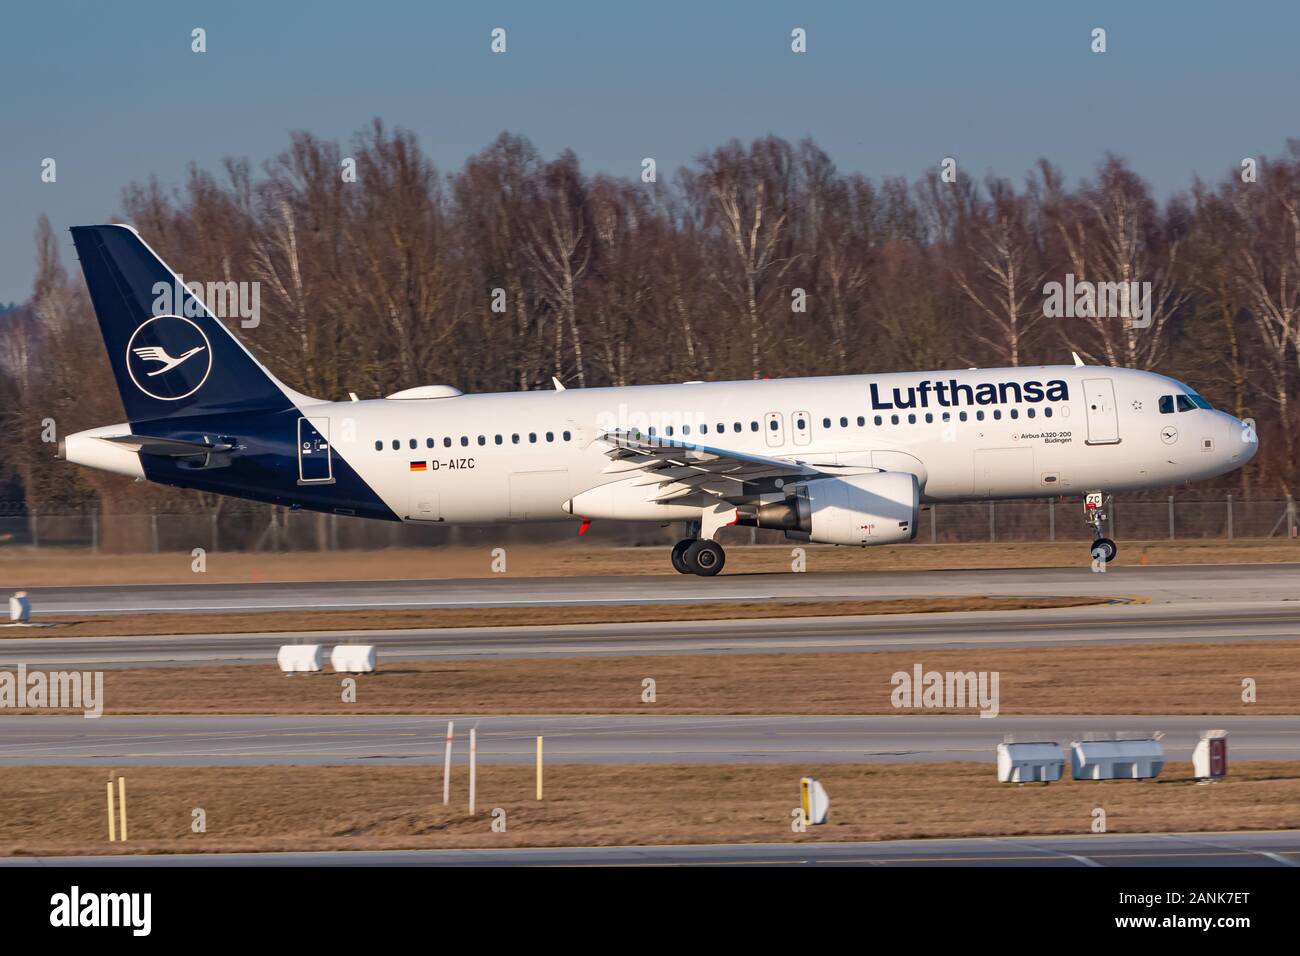 Munich, Germany - January 16, 2020: Lufthansa Airbus A320 airplane at Munich airport (MUC) in Germany. Airbus is an aircraft manufacturer from Toulous Stock Photo